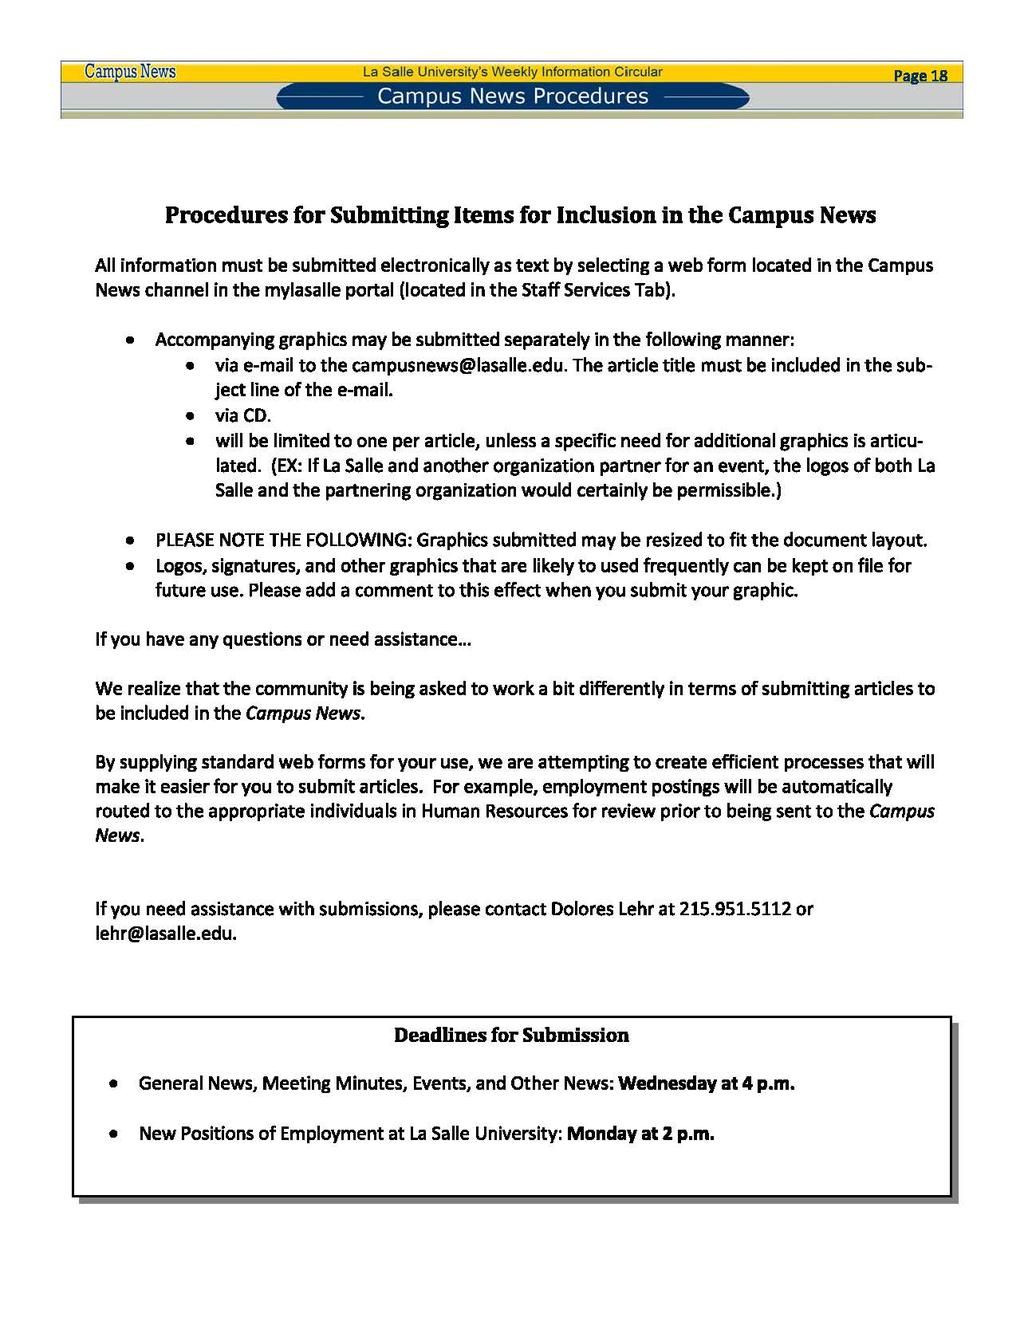 Pa e18 Campus News Procedures Procedures for Submitting Items for Inclusion in the Campus News All information must be submitted electronically as text by selecting a web form located in the Campus